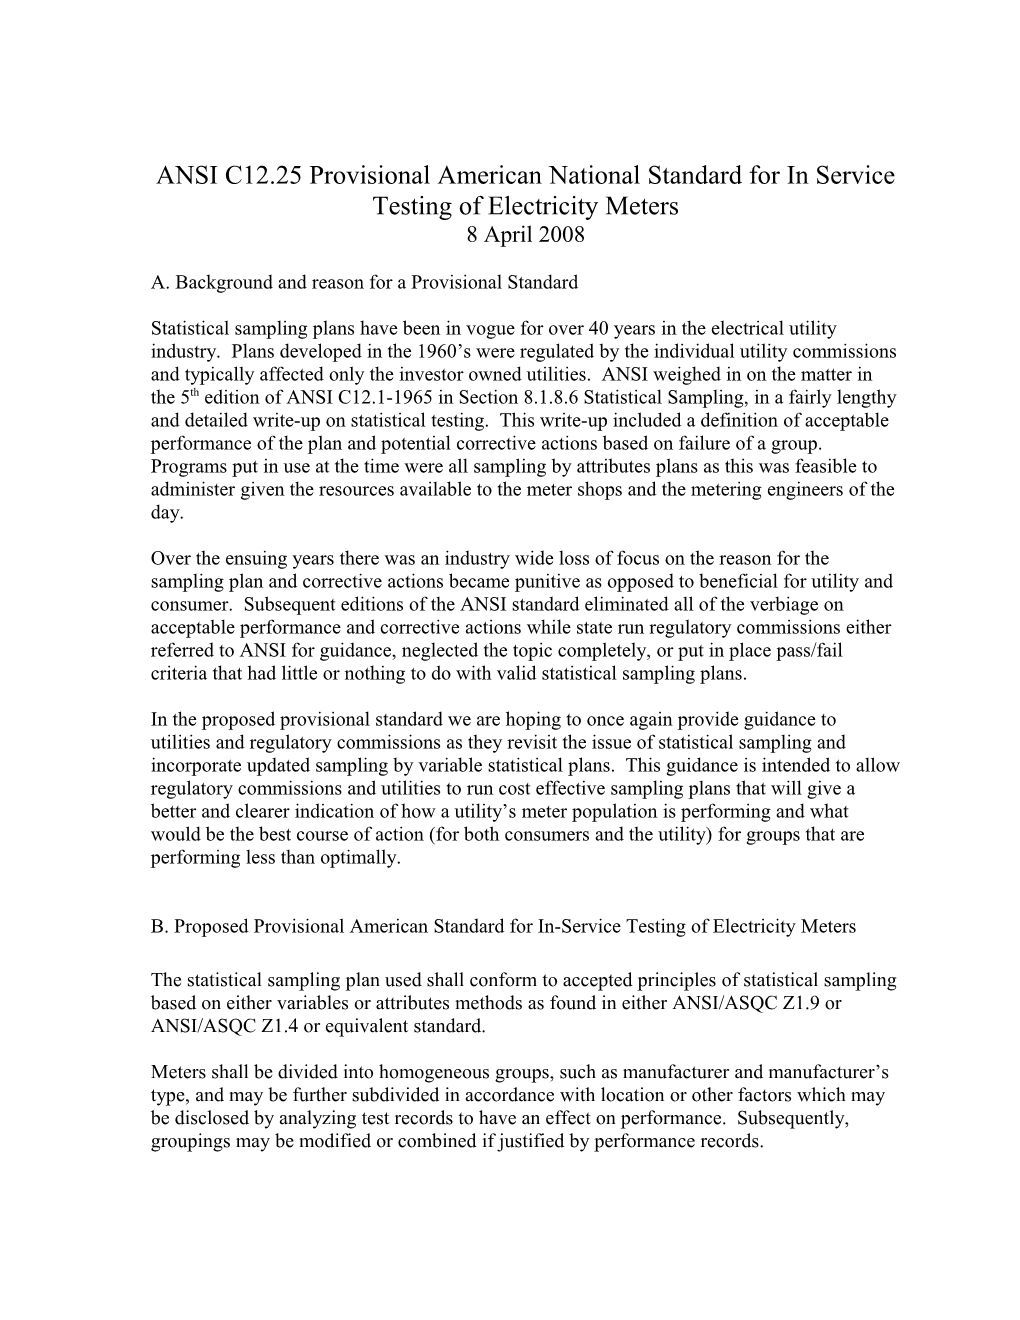 Working Committee Notes for Updating ANSI C12